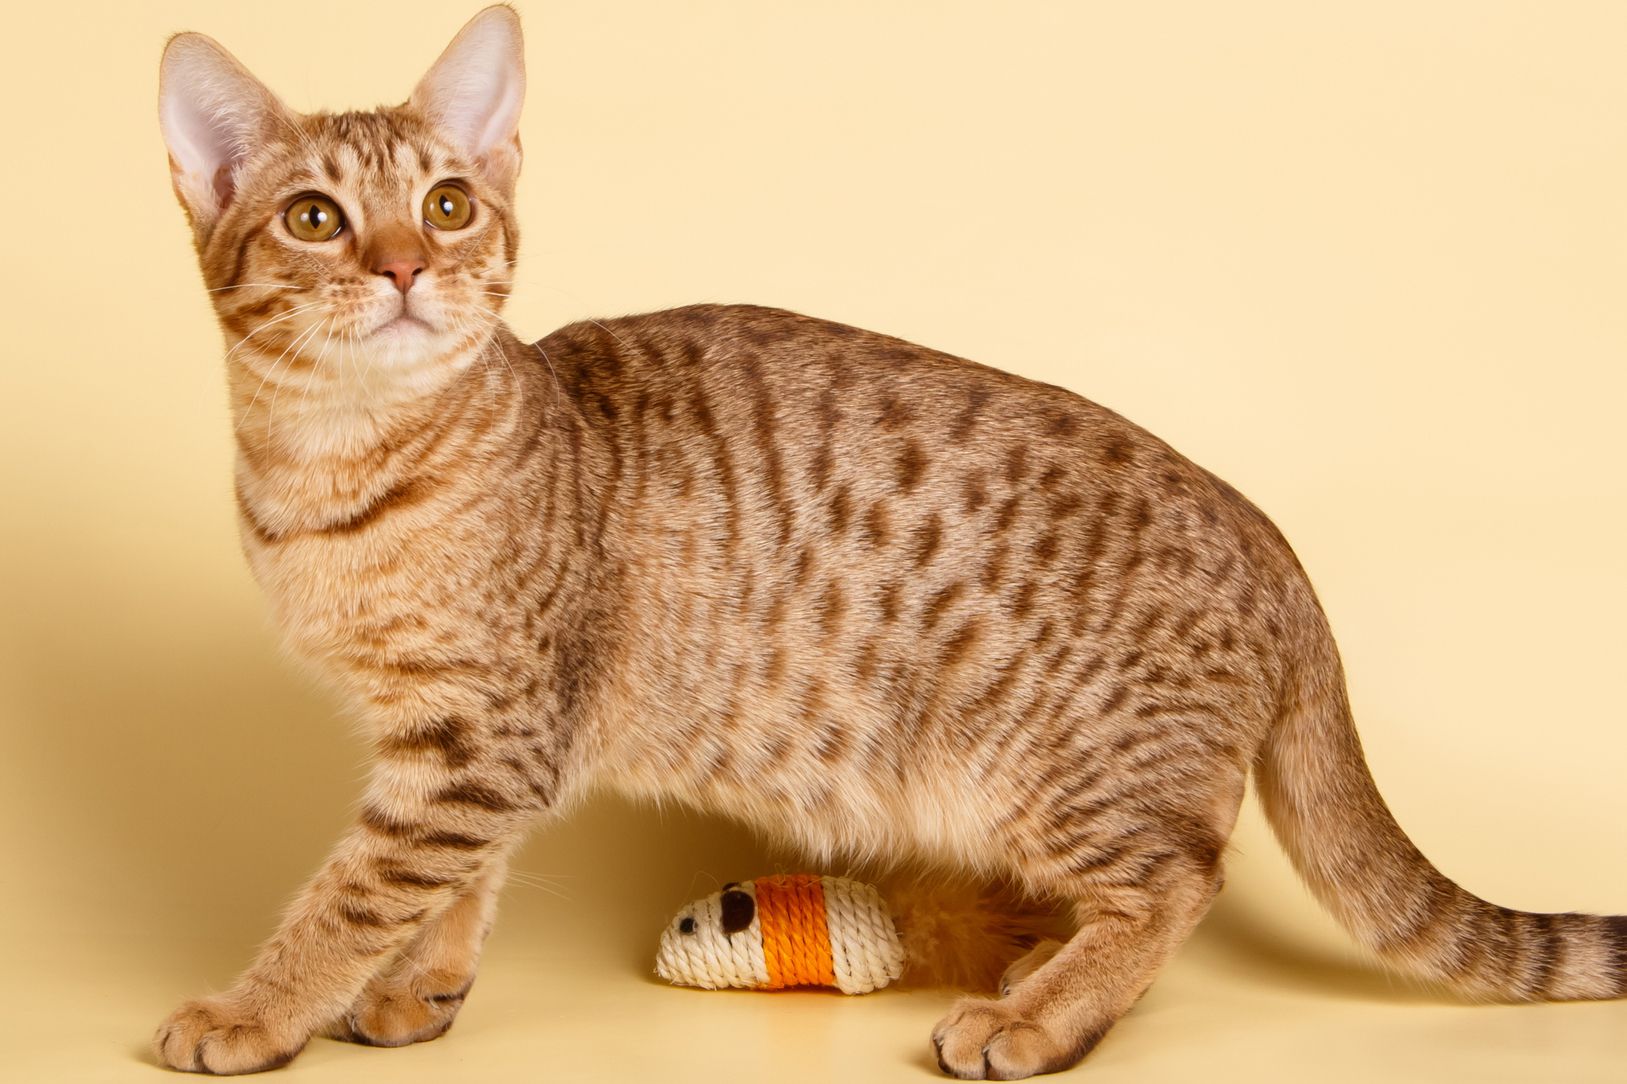 An Ocicat sitting with a scratching toy